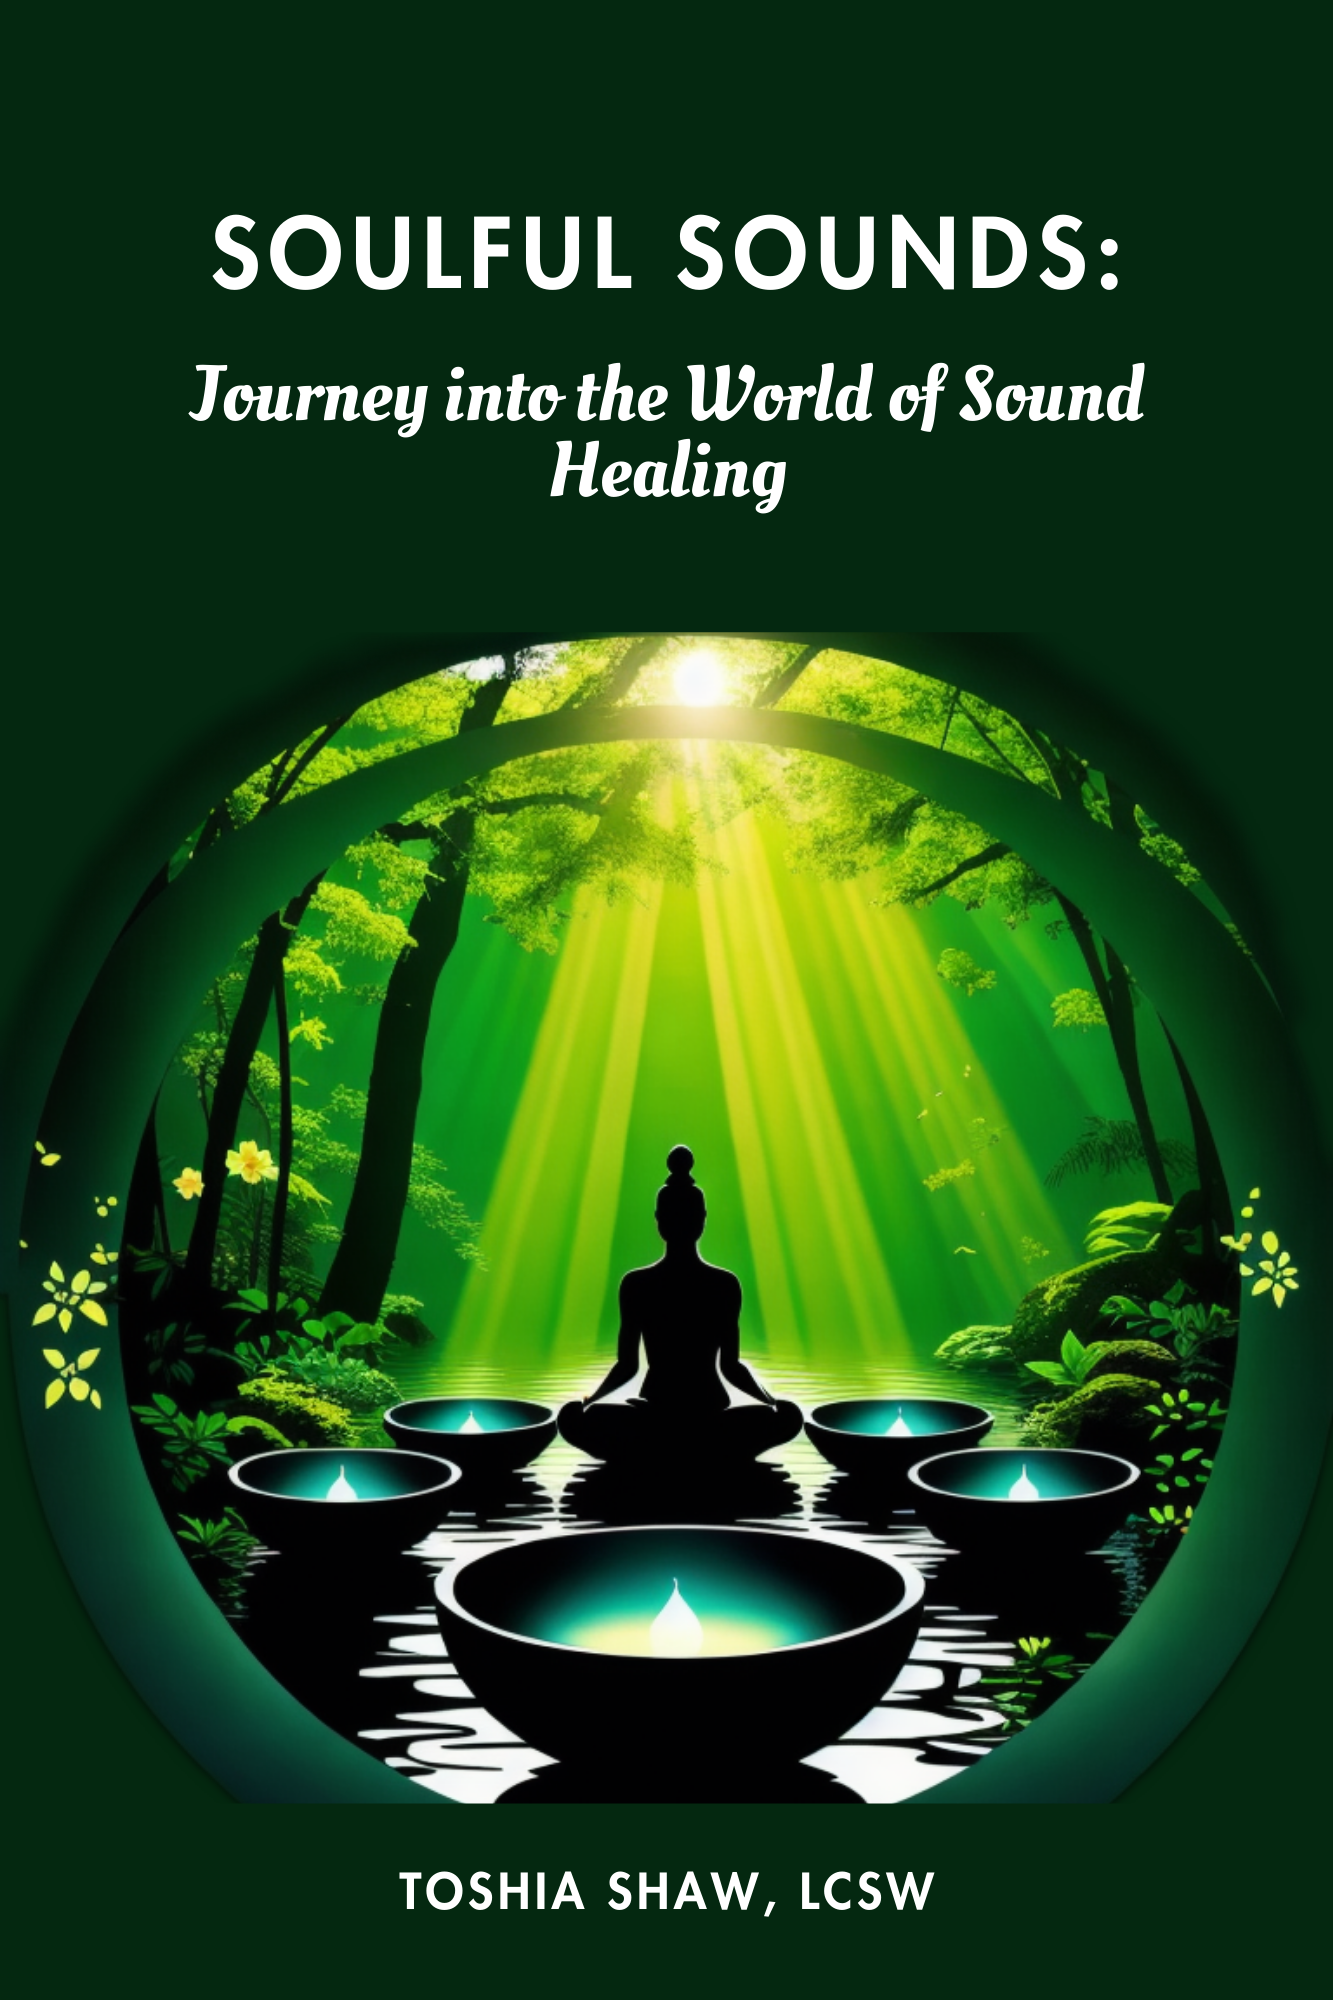 Soulful Sounds: Journey into the World of Sound Healing